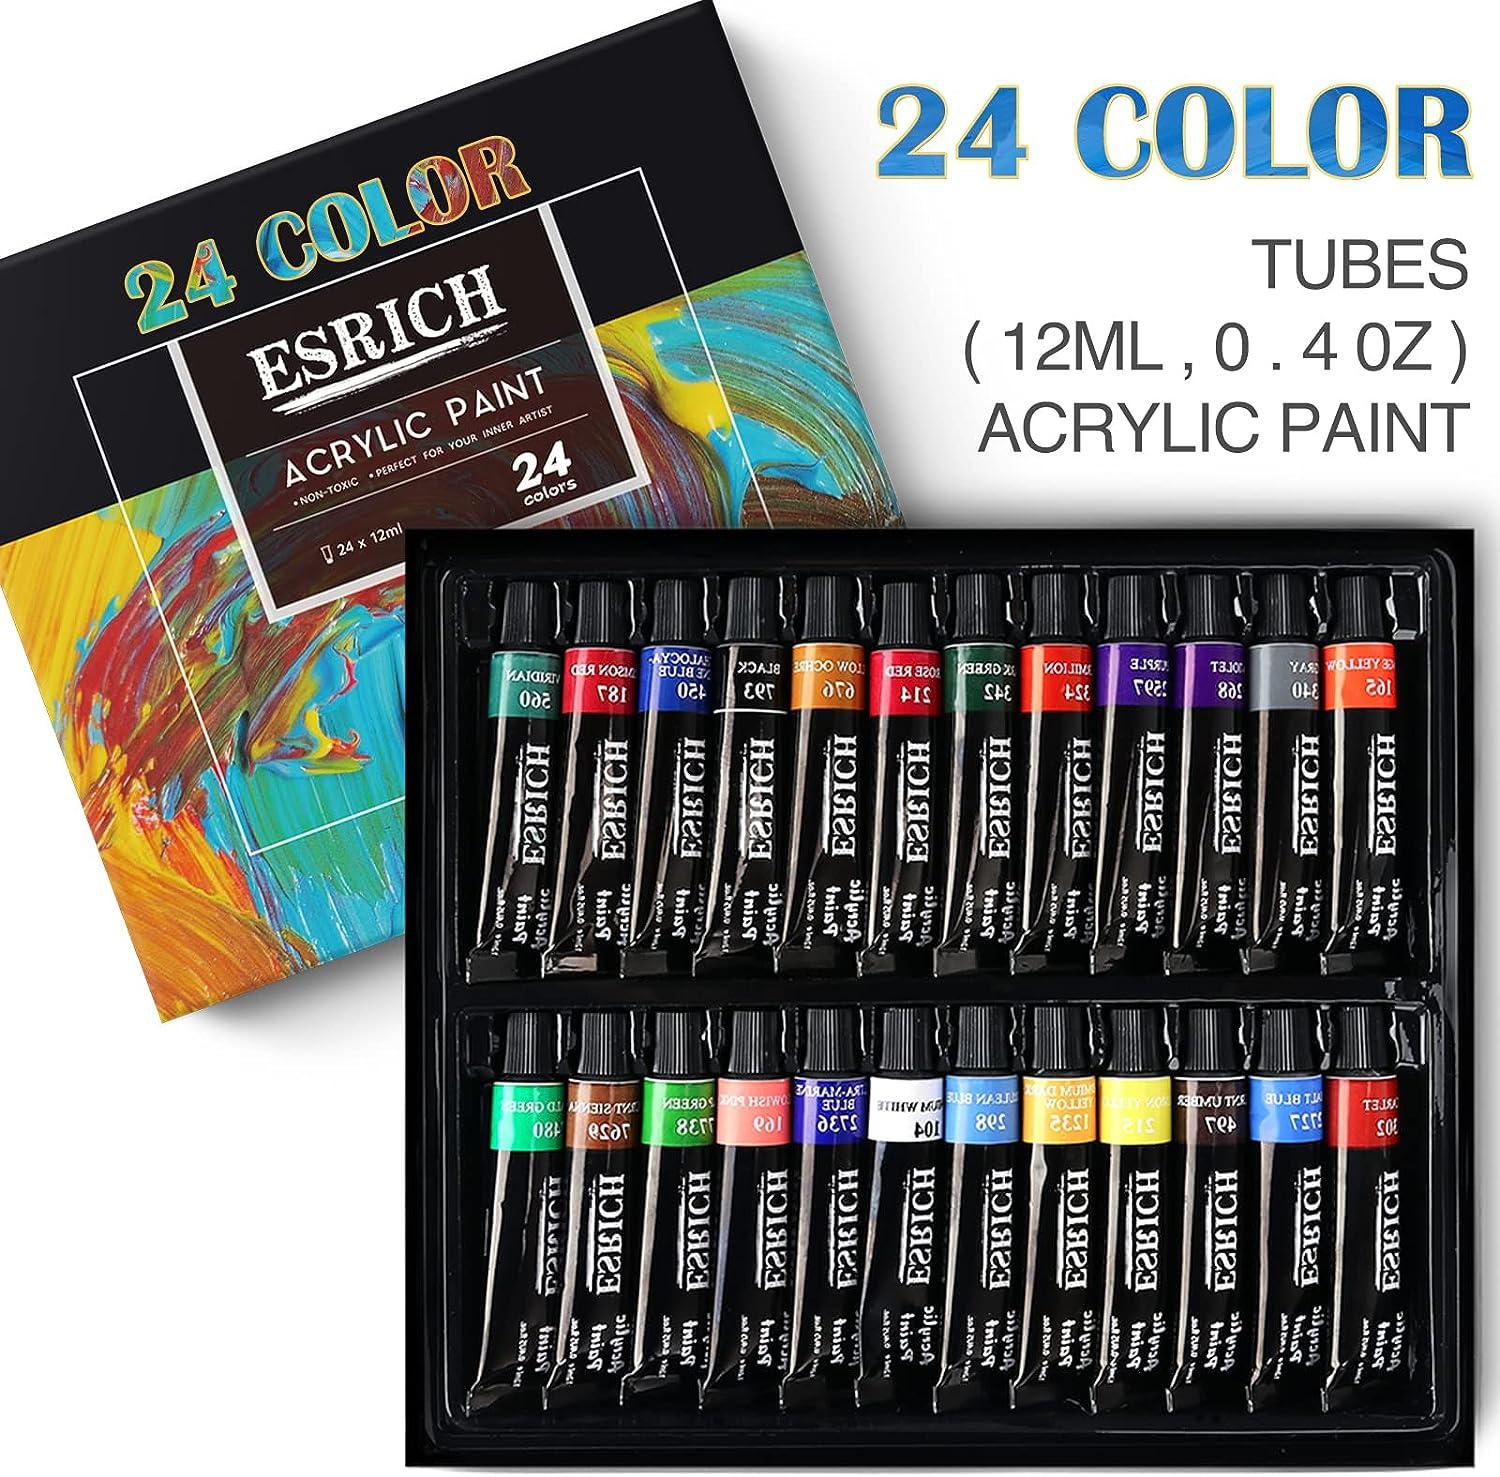 Acrylic Paint Set,46 Piece Professional Painting Supplies with